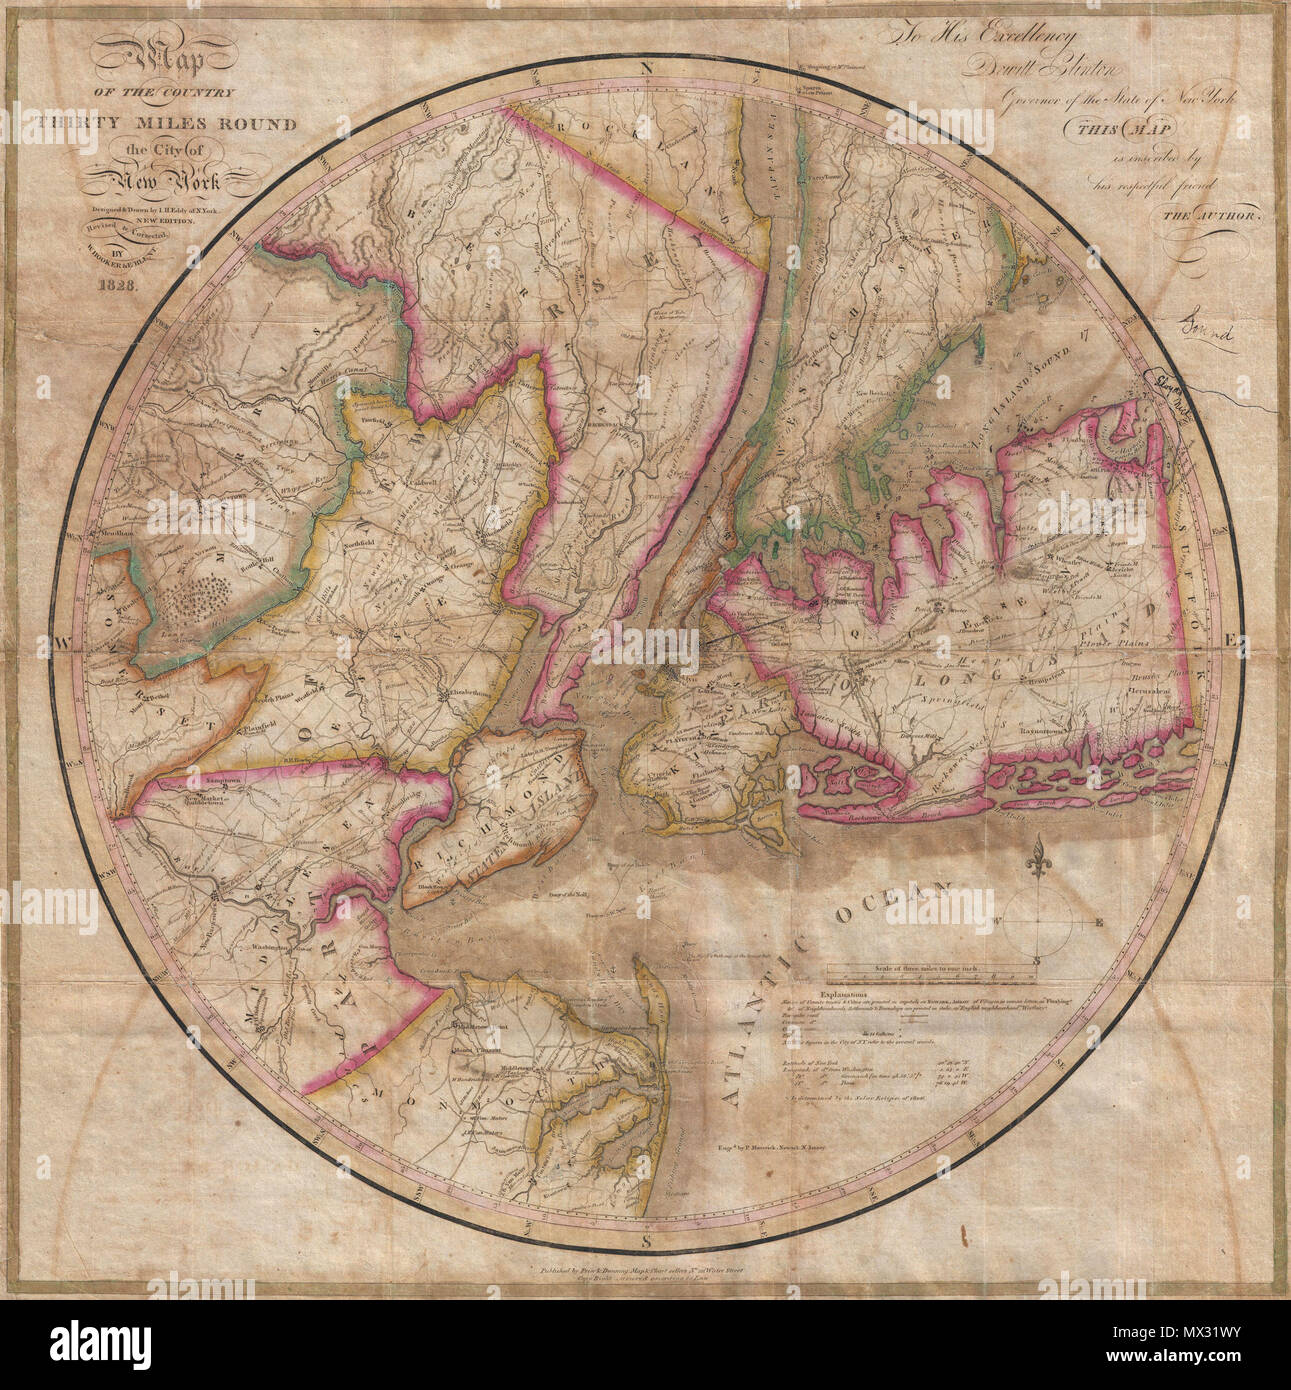 . Map of the country Thirty Miles Round the City of New York.  English: Known as The Eddy Map, this is an extremely rare and important circular map of New York City and vicinity, dated 1823. Covers the New York City area in roughly a thirty mile radius of Manhattan, extending north to Tarrytown, south to Monmouth, west to Somerset, and east to Suffolk County. Isaac Stokes, in his 1928 classic on the iconography of Manhattan, calls this map one of the most complete, accurate, and beautiful early engraved maps showing New York and its environs. It is also recorded that Thomas Jefferson kept a co Stock Photo